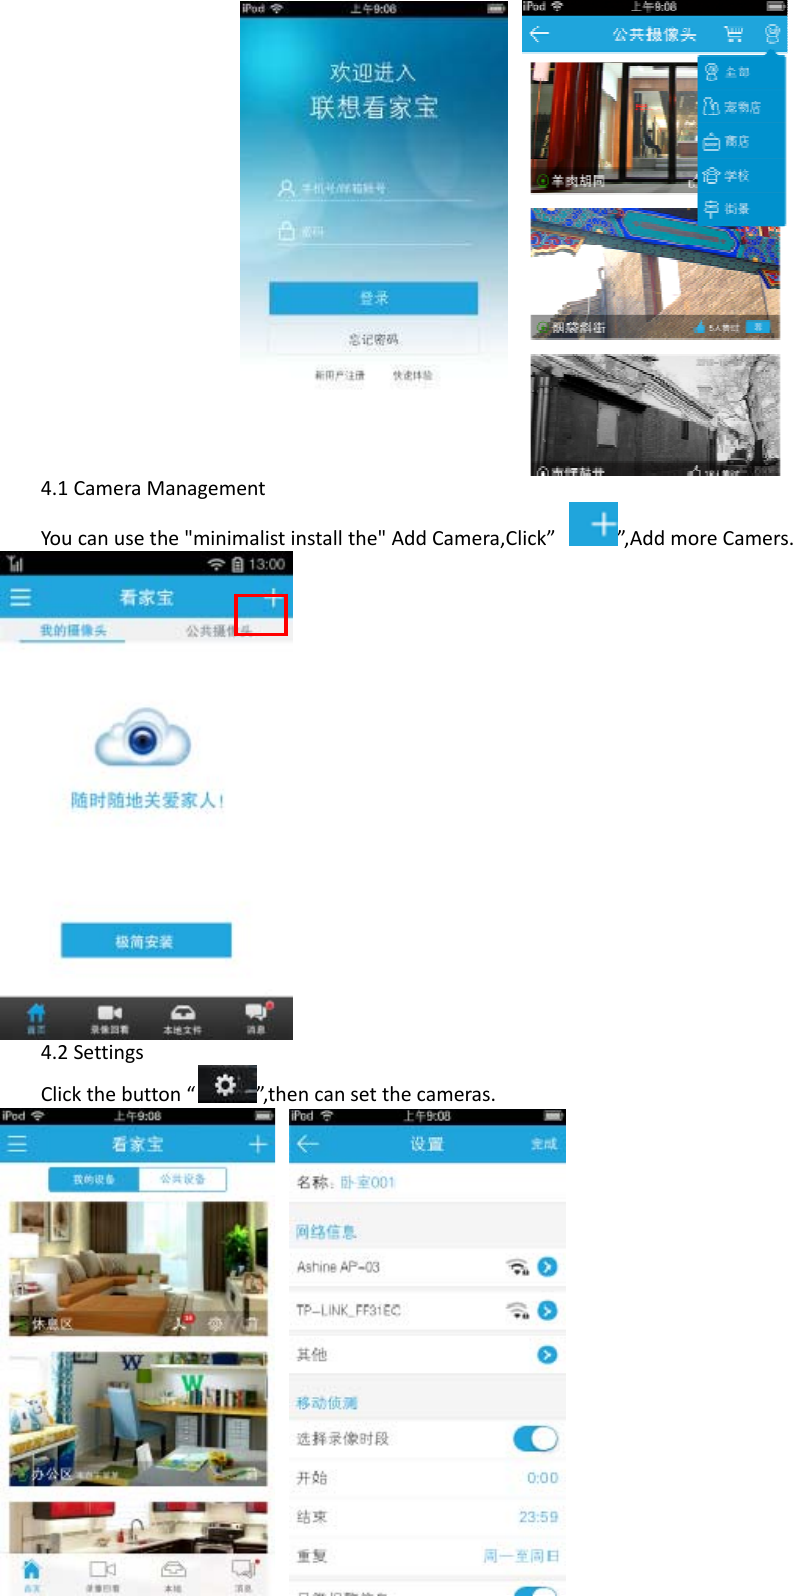 4.1CameraManagementYoucanusethe&quot;minimalistinstallthe&quot;AddCamera,Click””,Ad dmoreCamers.4.2SettingsClickthebutton“”,thencansetthecameras.